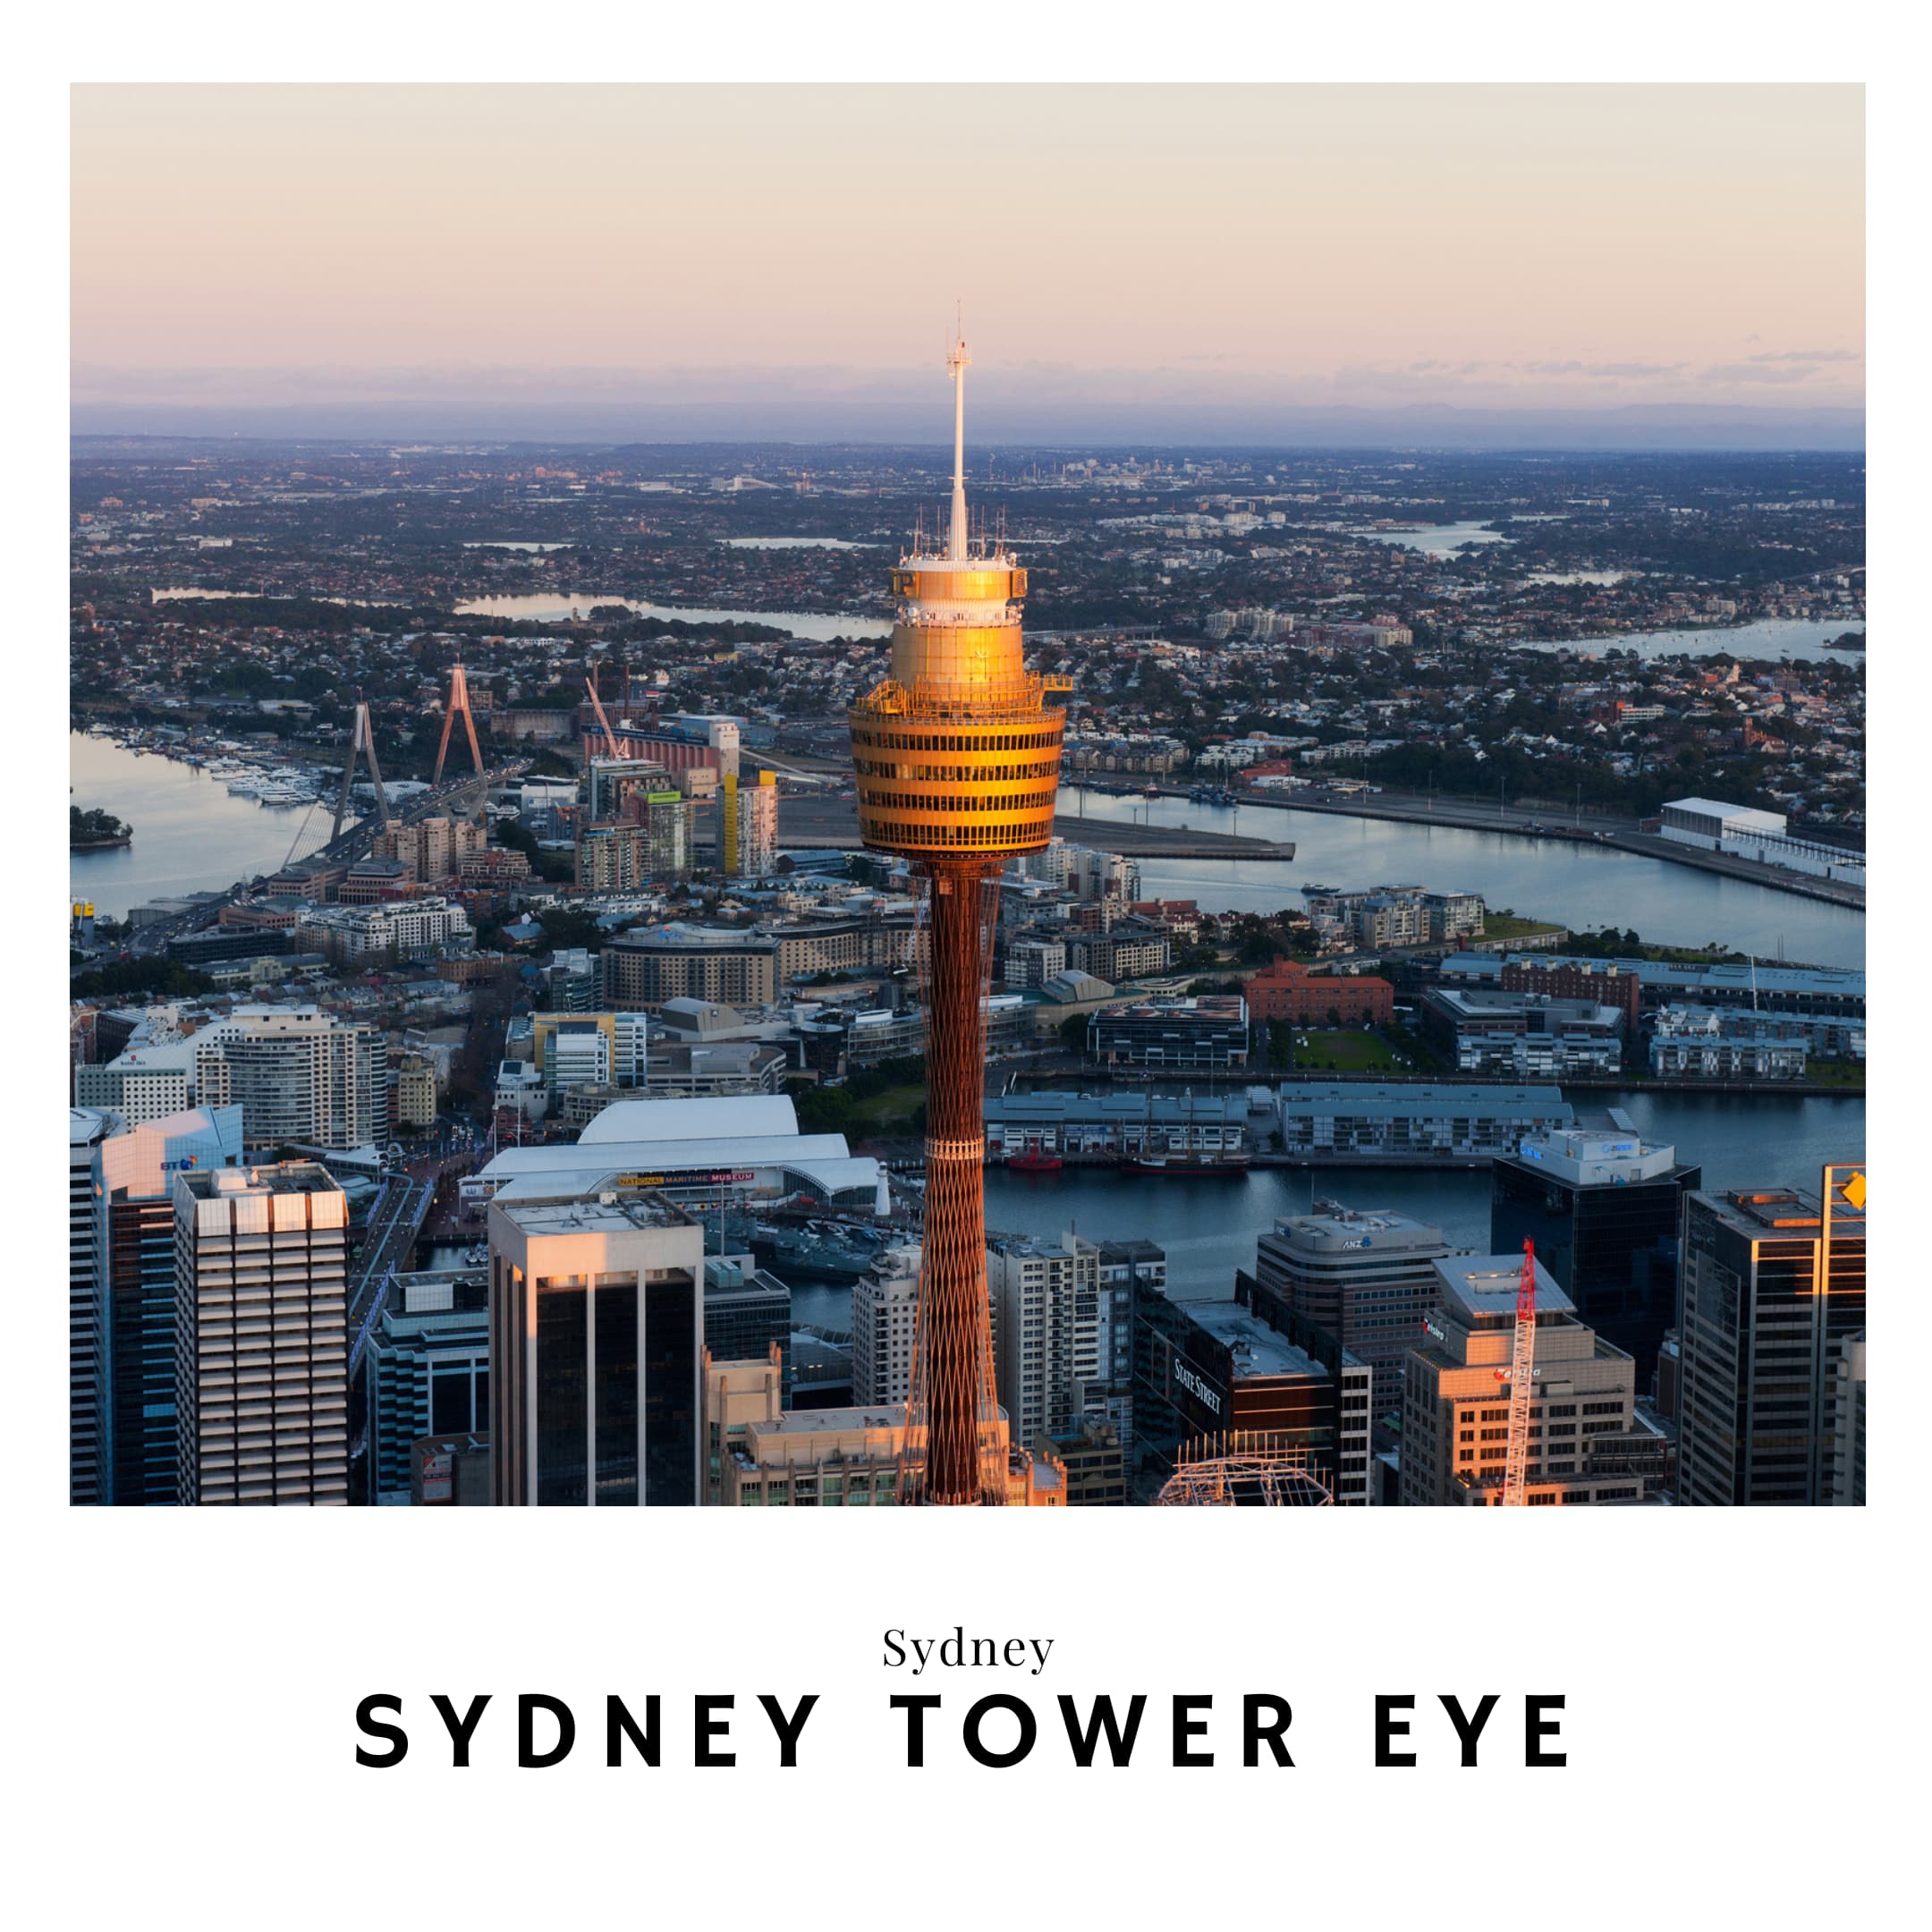 Link to the Sydney Tower eye travel guide